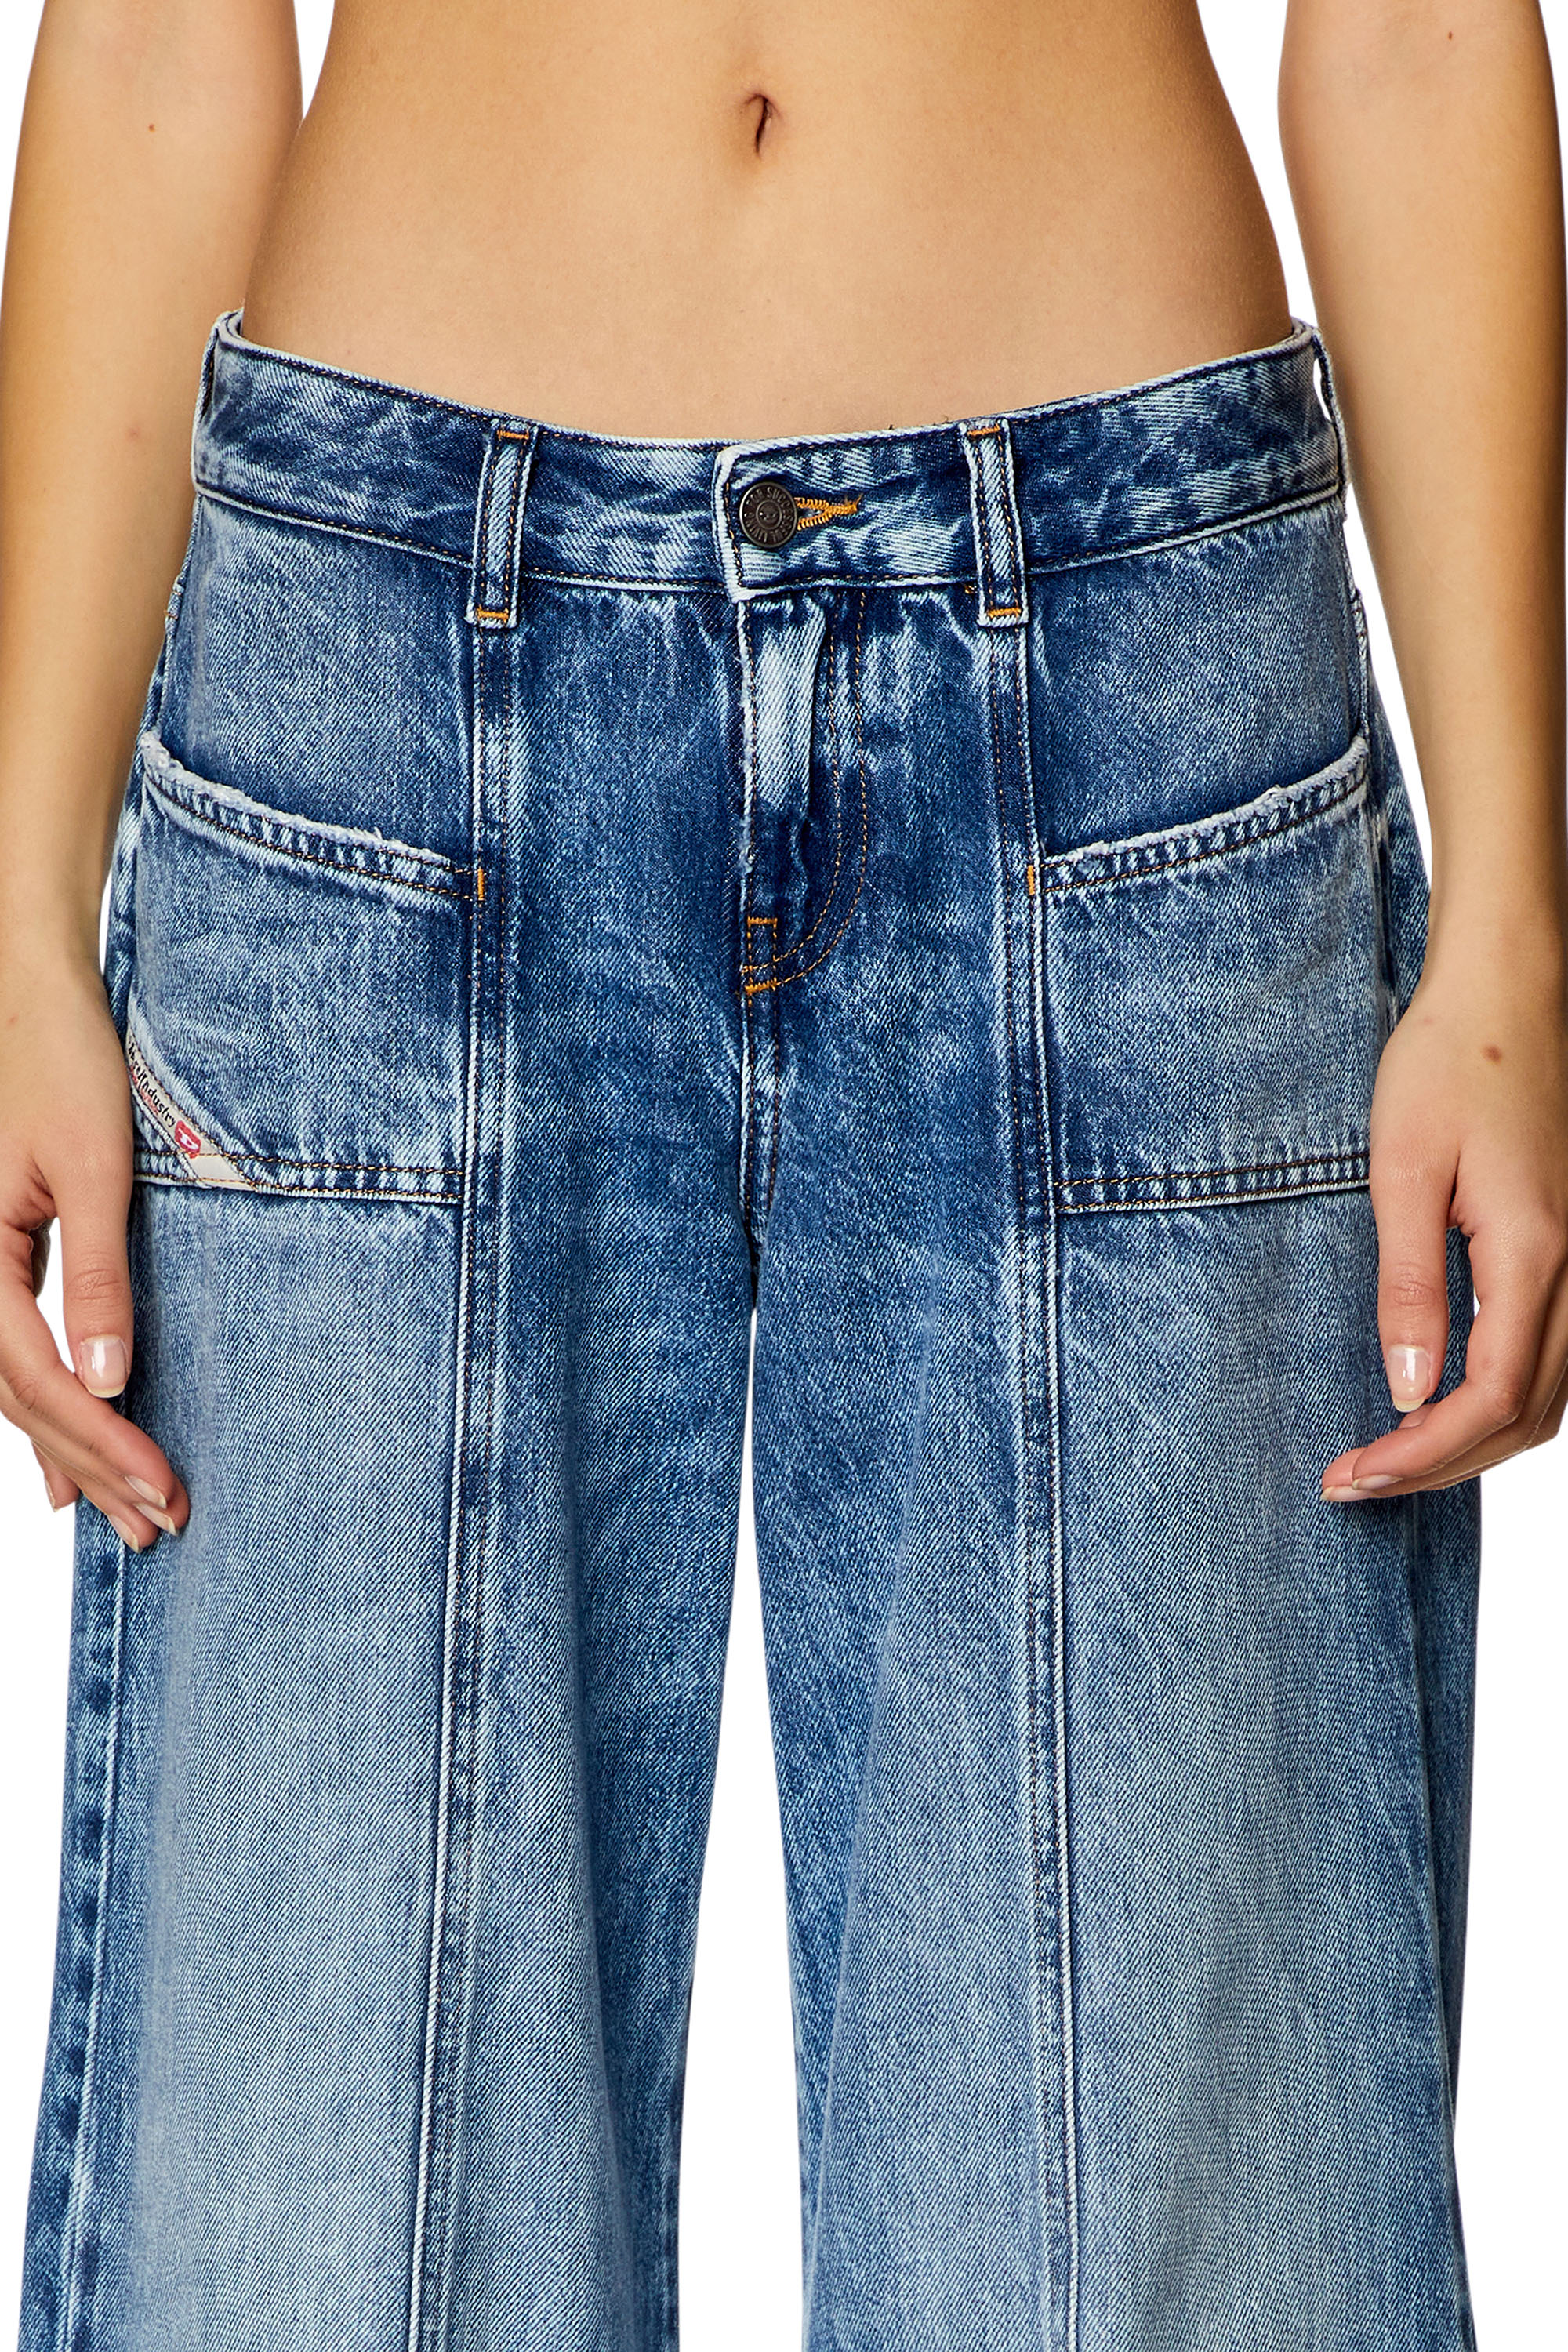 Diesel - Bootcut and Flare Jeans D-Akii 09H95, Mujer Bootcut y Flare Jeans - D-Akii in Azul marino - Image 4